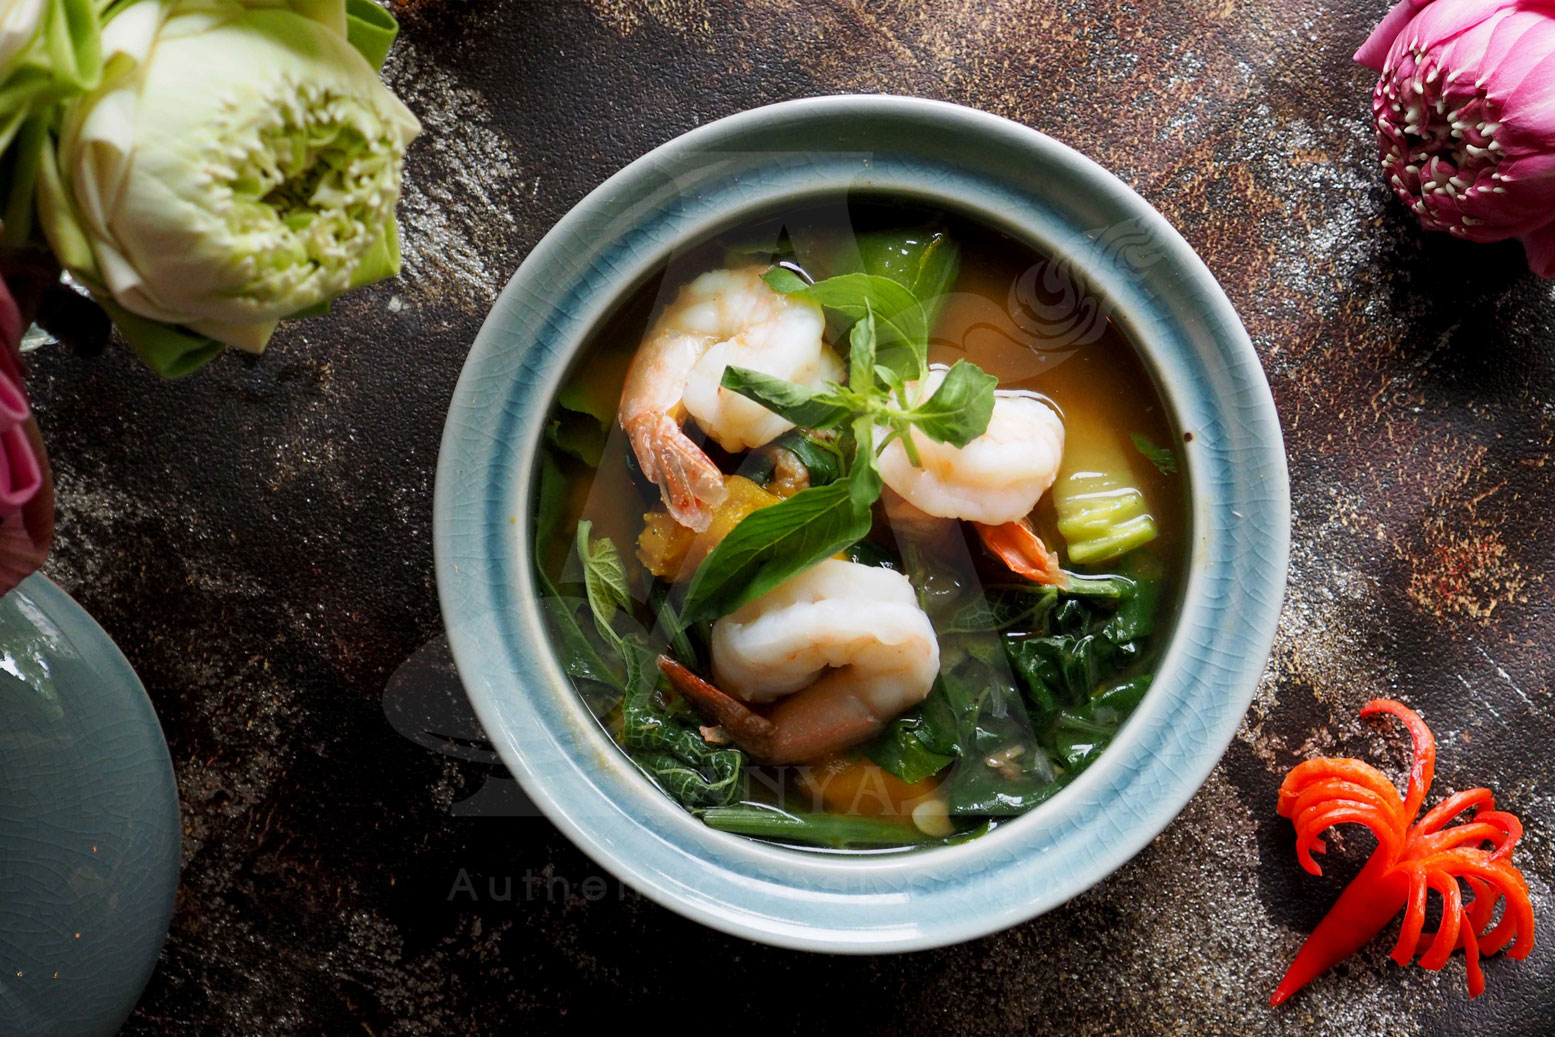 Spicy Clear Soup With Vegetable And Prawns (Kaeng Liang Goong Sod)